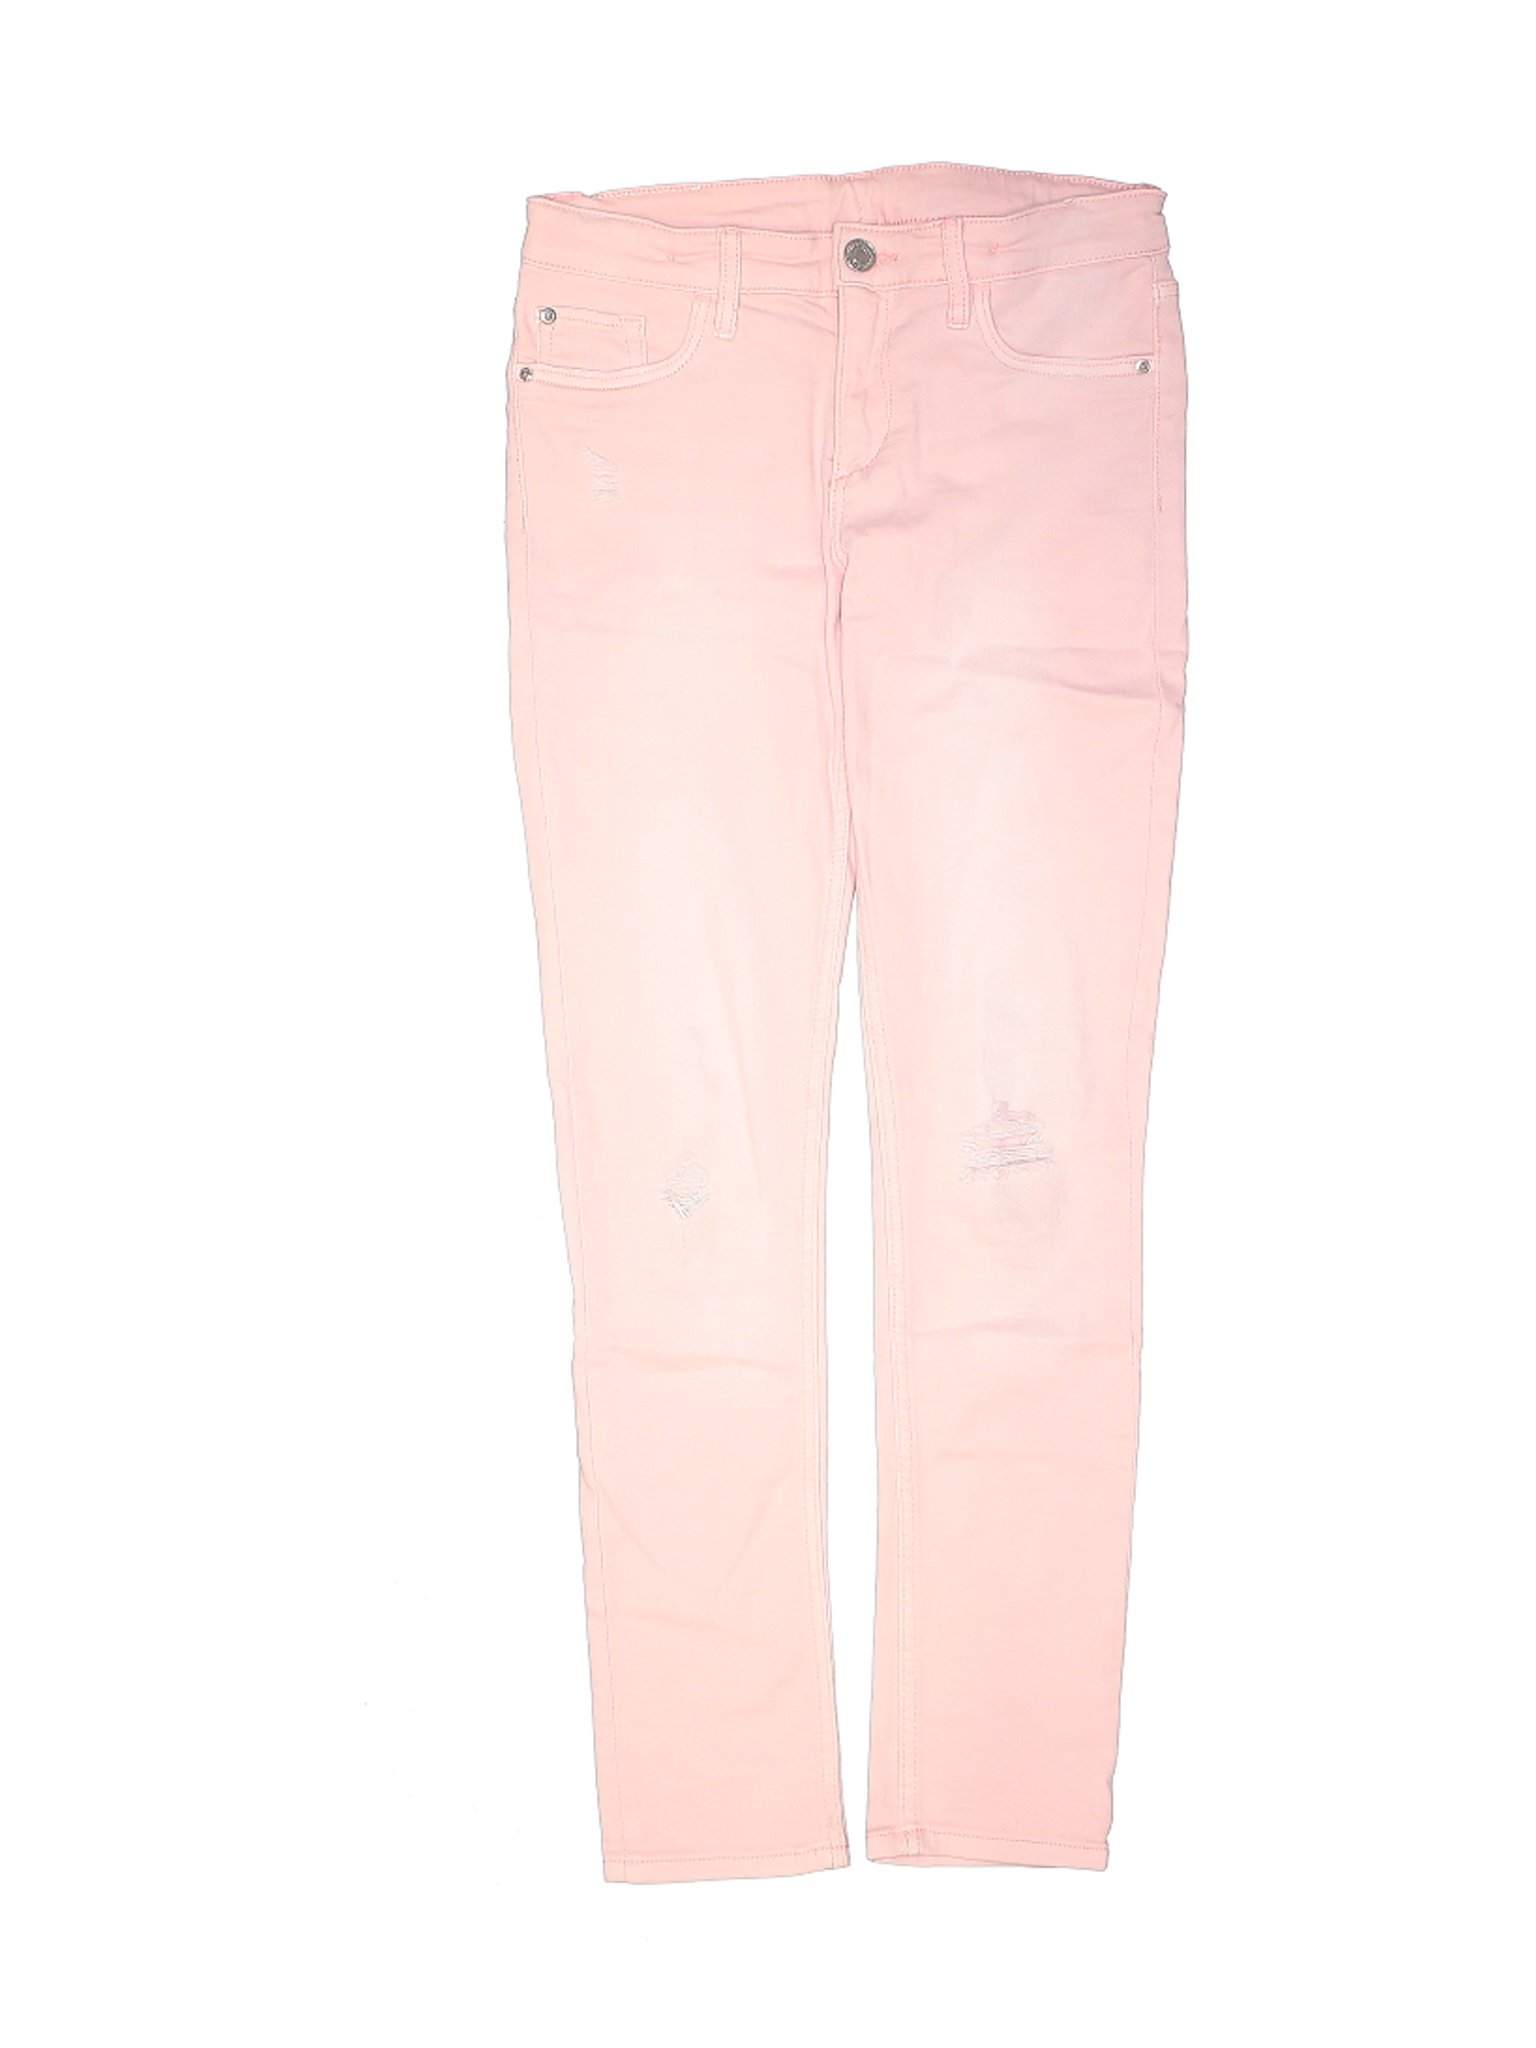 h&m pink jeans